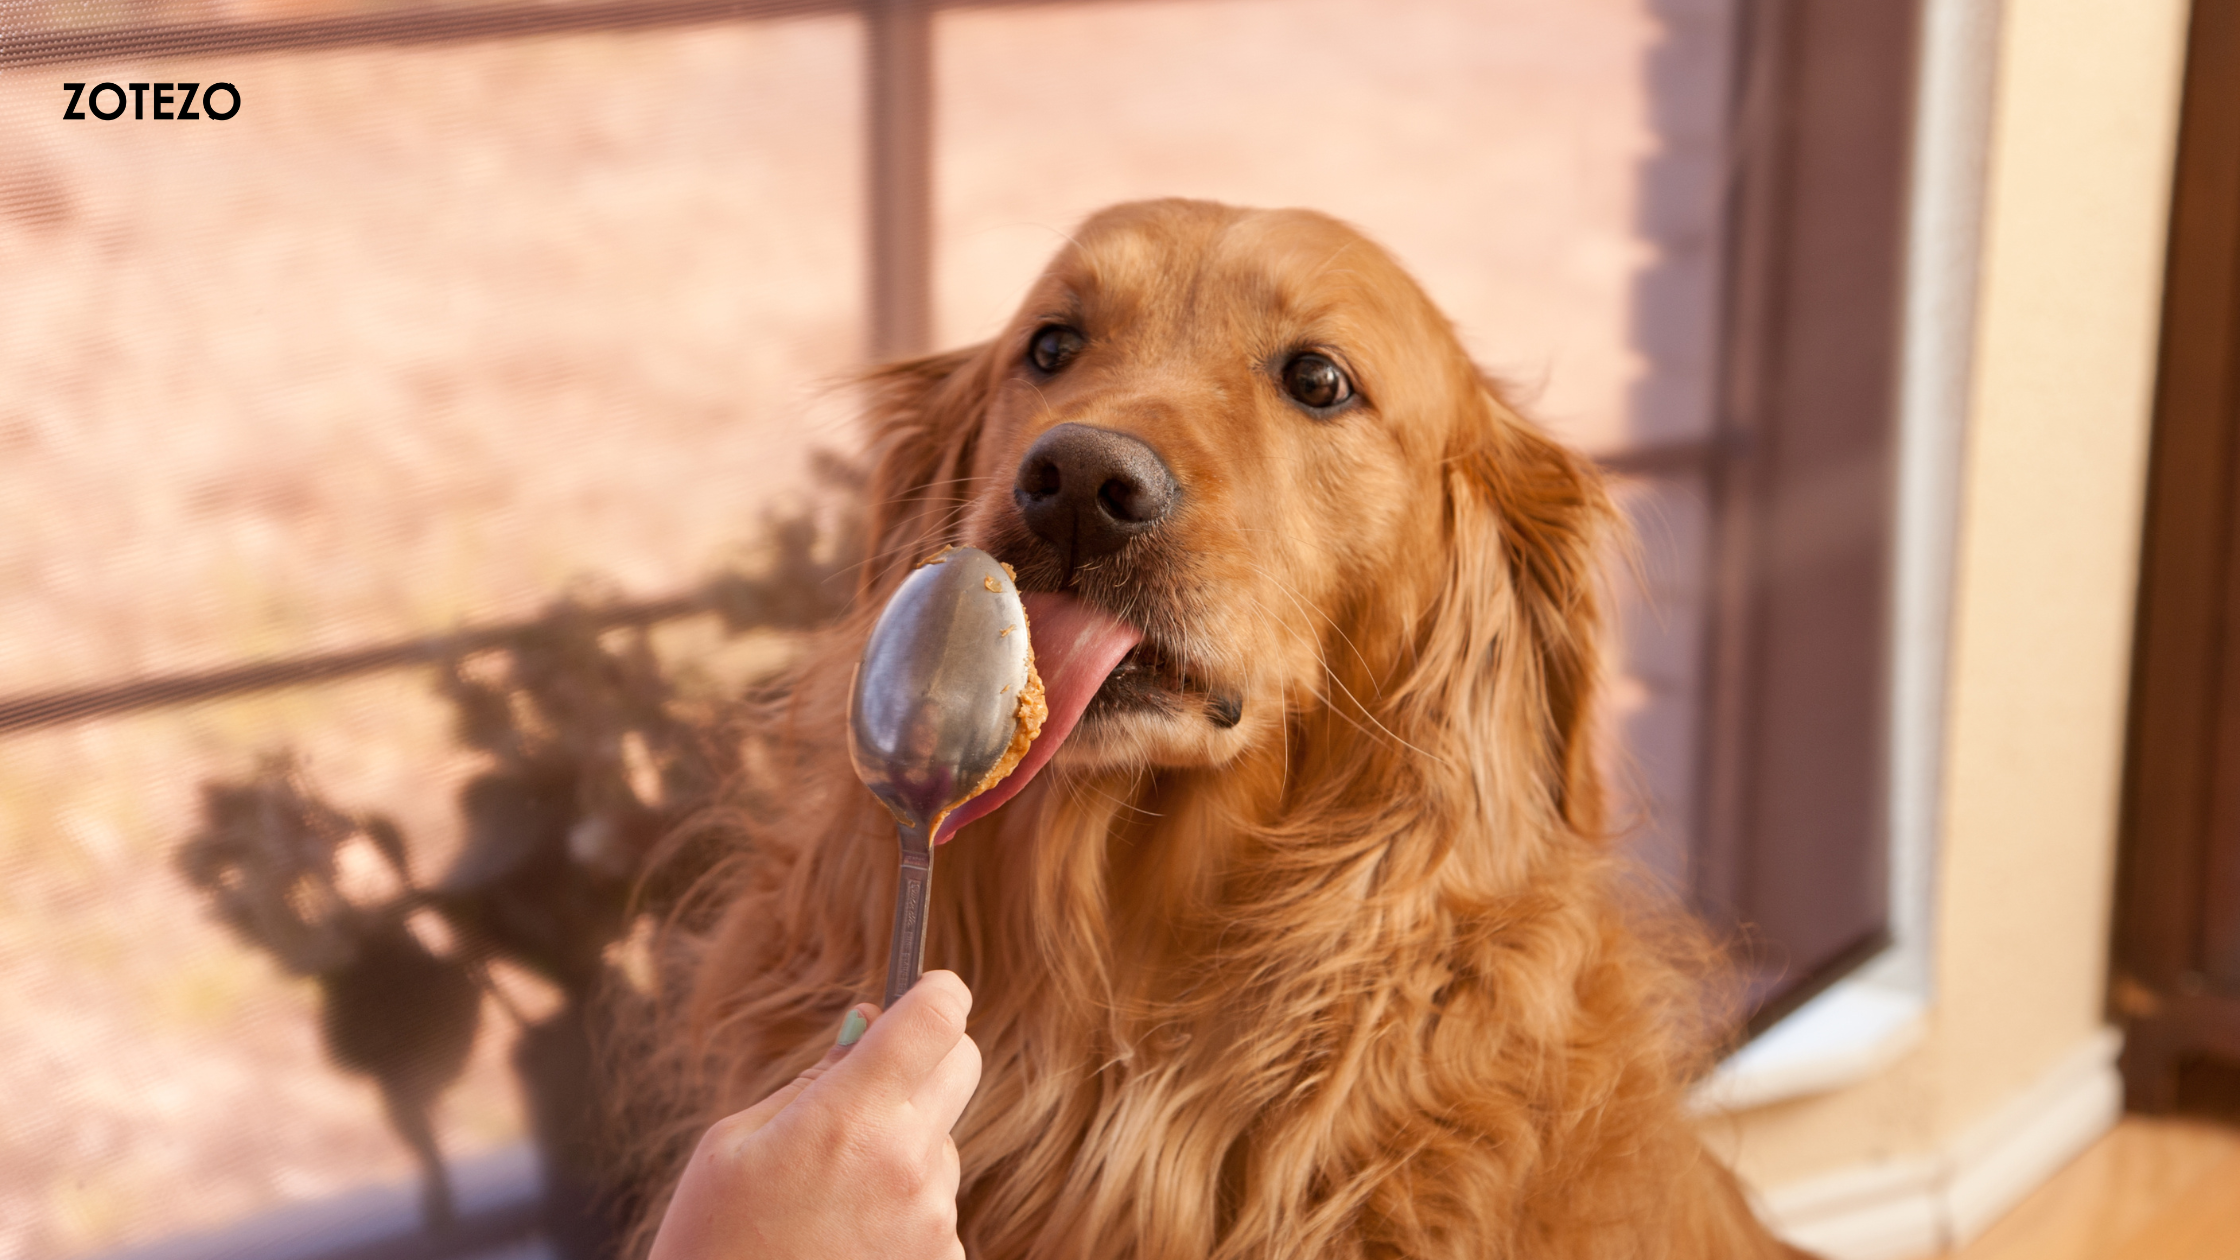 Peanut Butter For Dogs in France